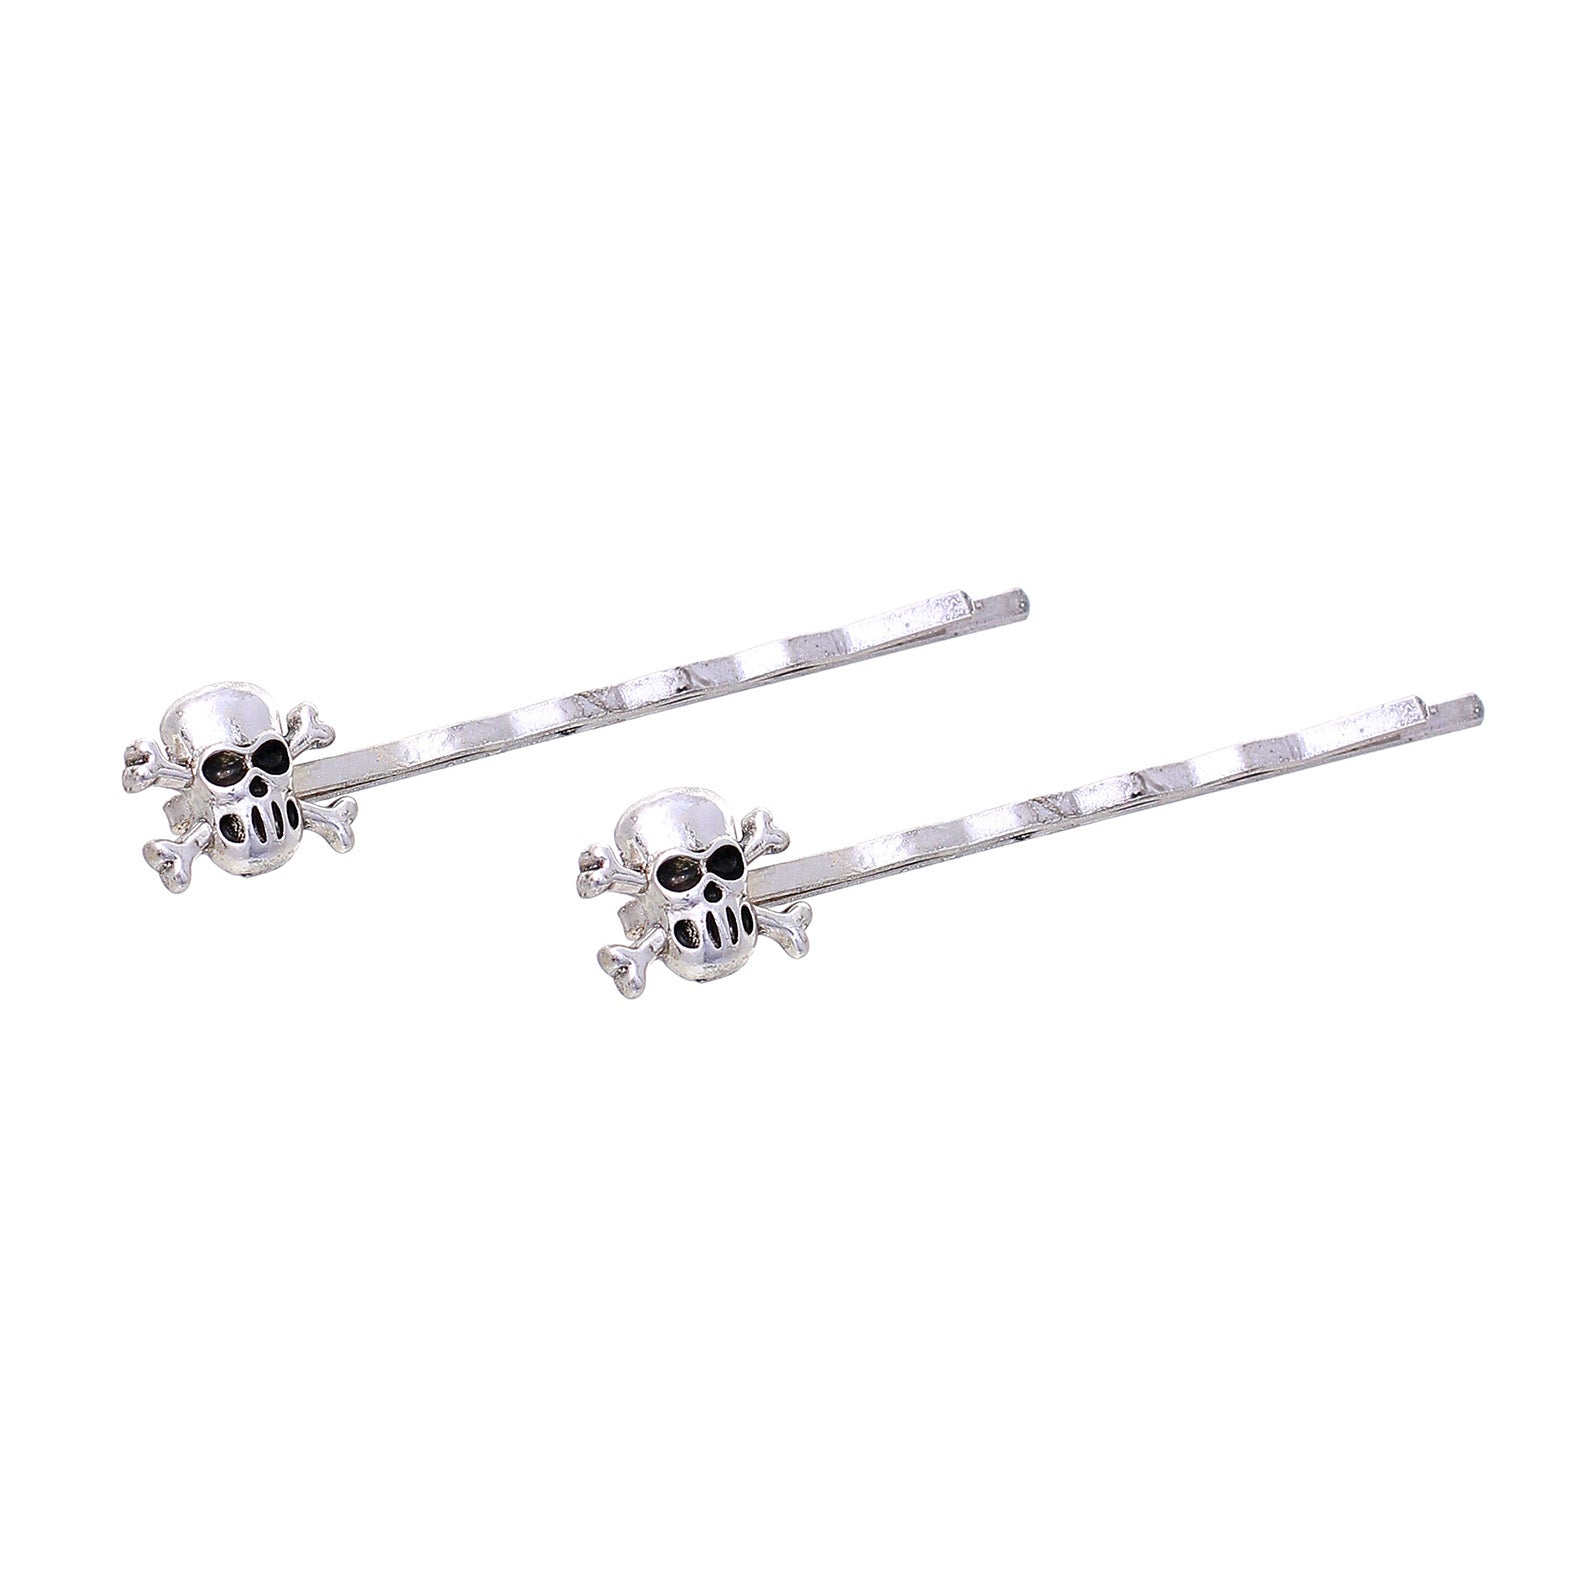 Spooktacular Fun Halloween Hair Clip Bewitching Bobby Pins Set Of 2 (Skull And Crossbones Silver Tone)